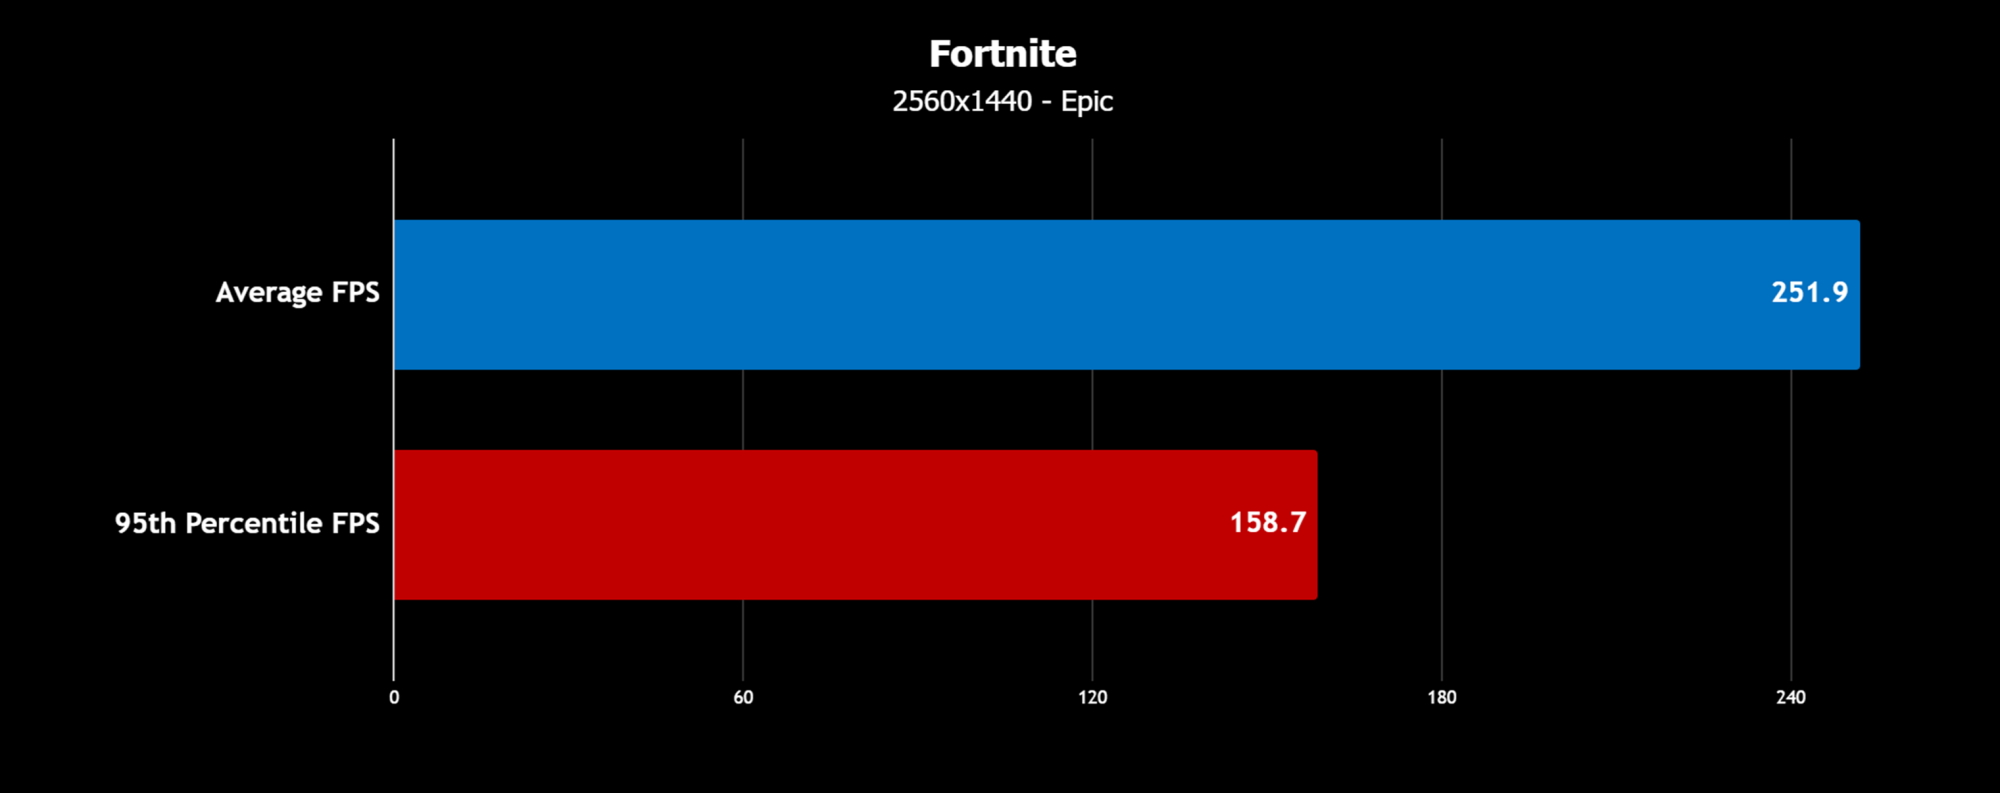 A graph showing 251.9 average FPS in Fortnite at 2560x1440.